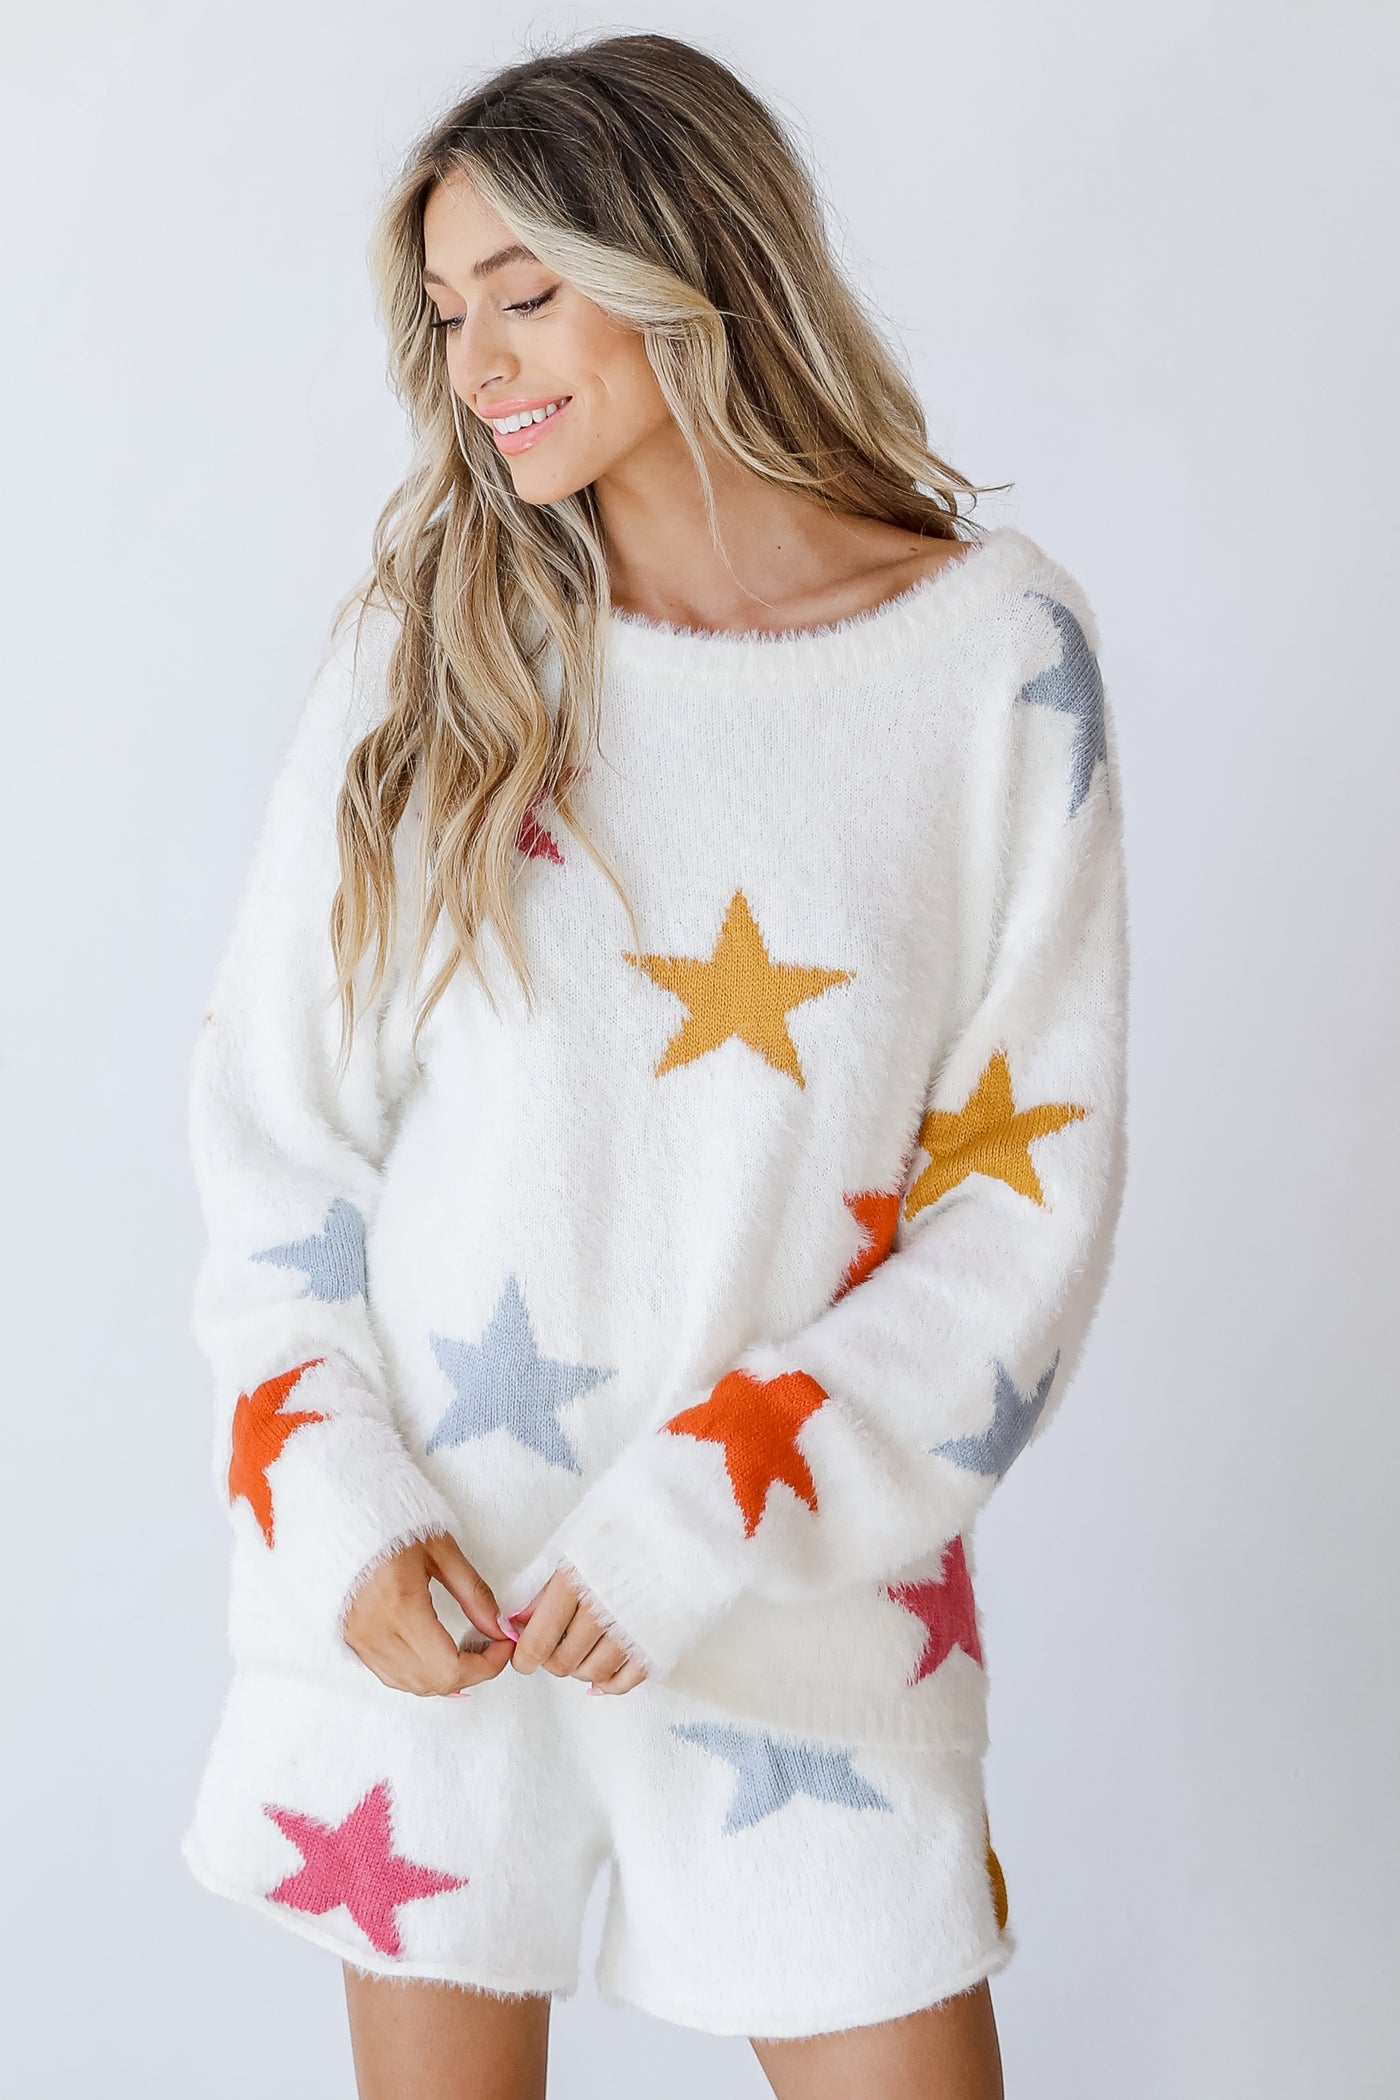 Star Sweater front view